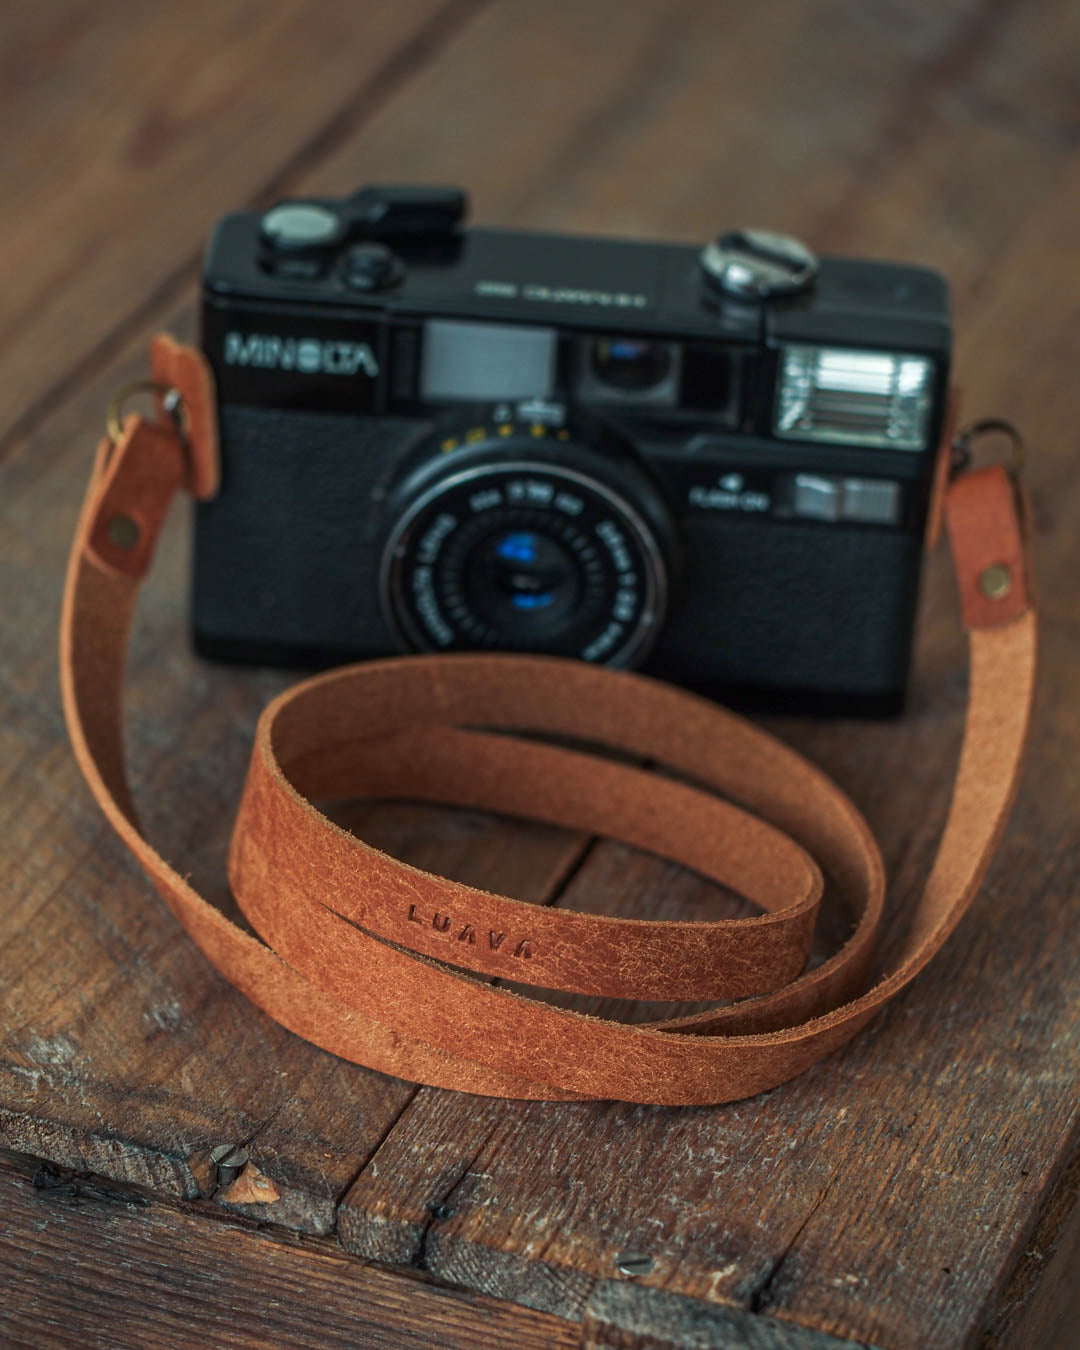 Luava - Handcrafted leather wallets, camera straps, etc. from Finland.